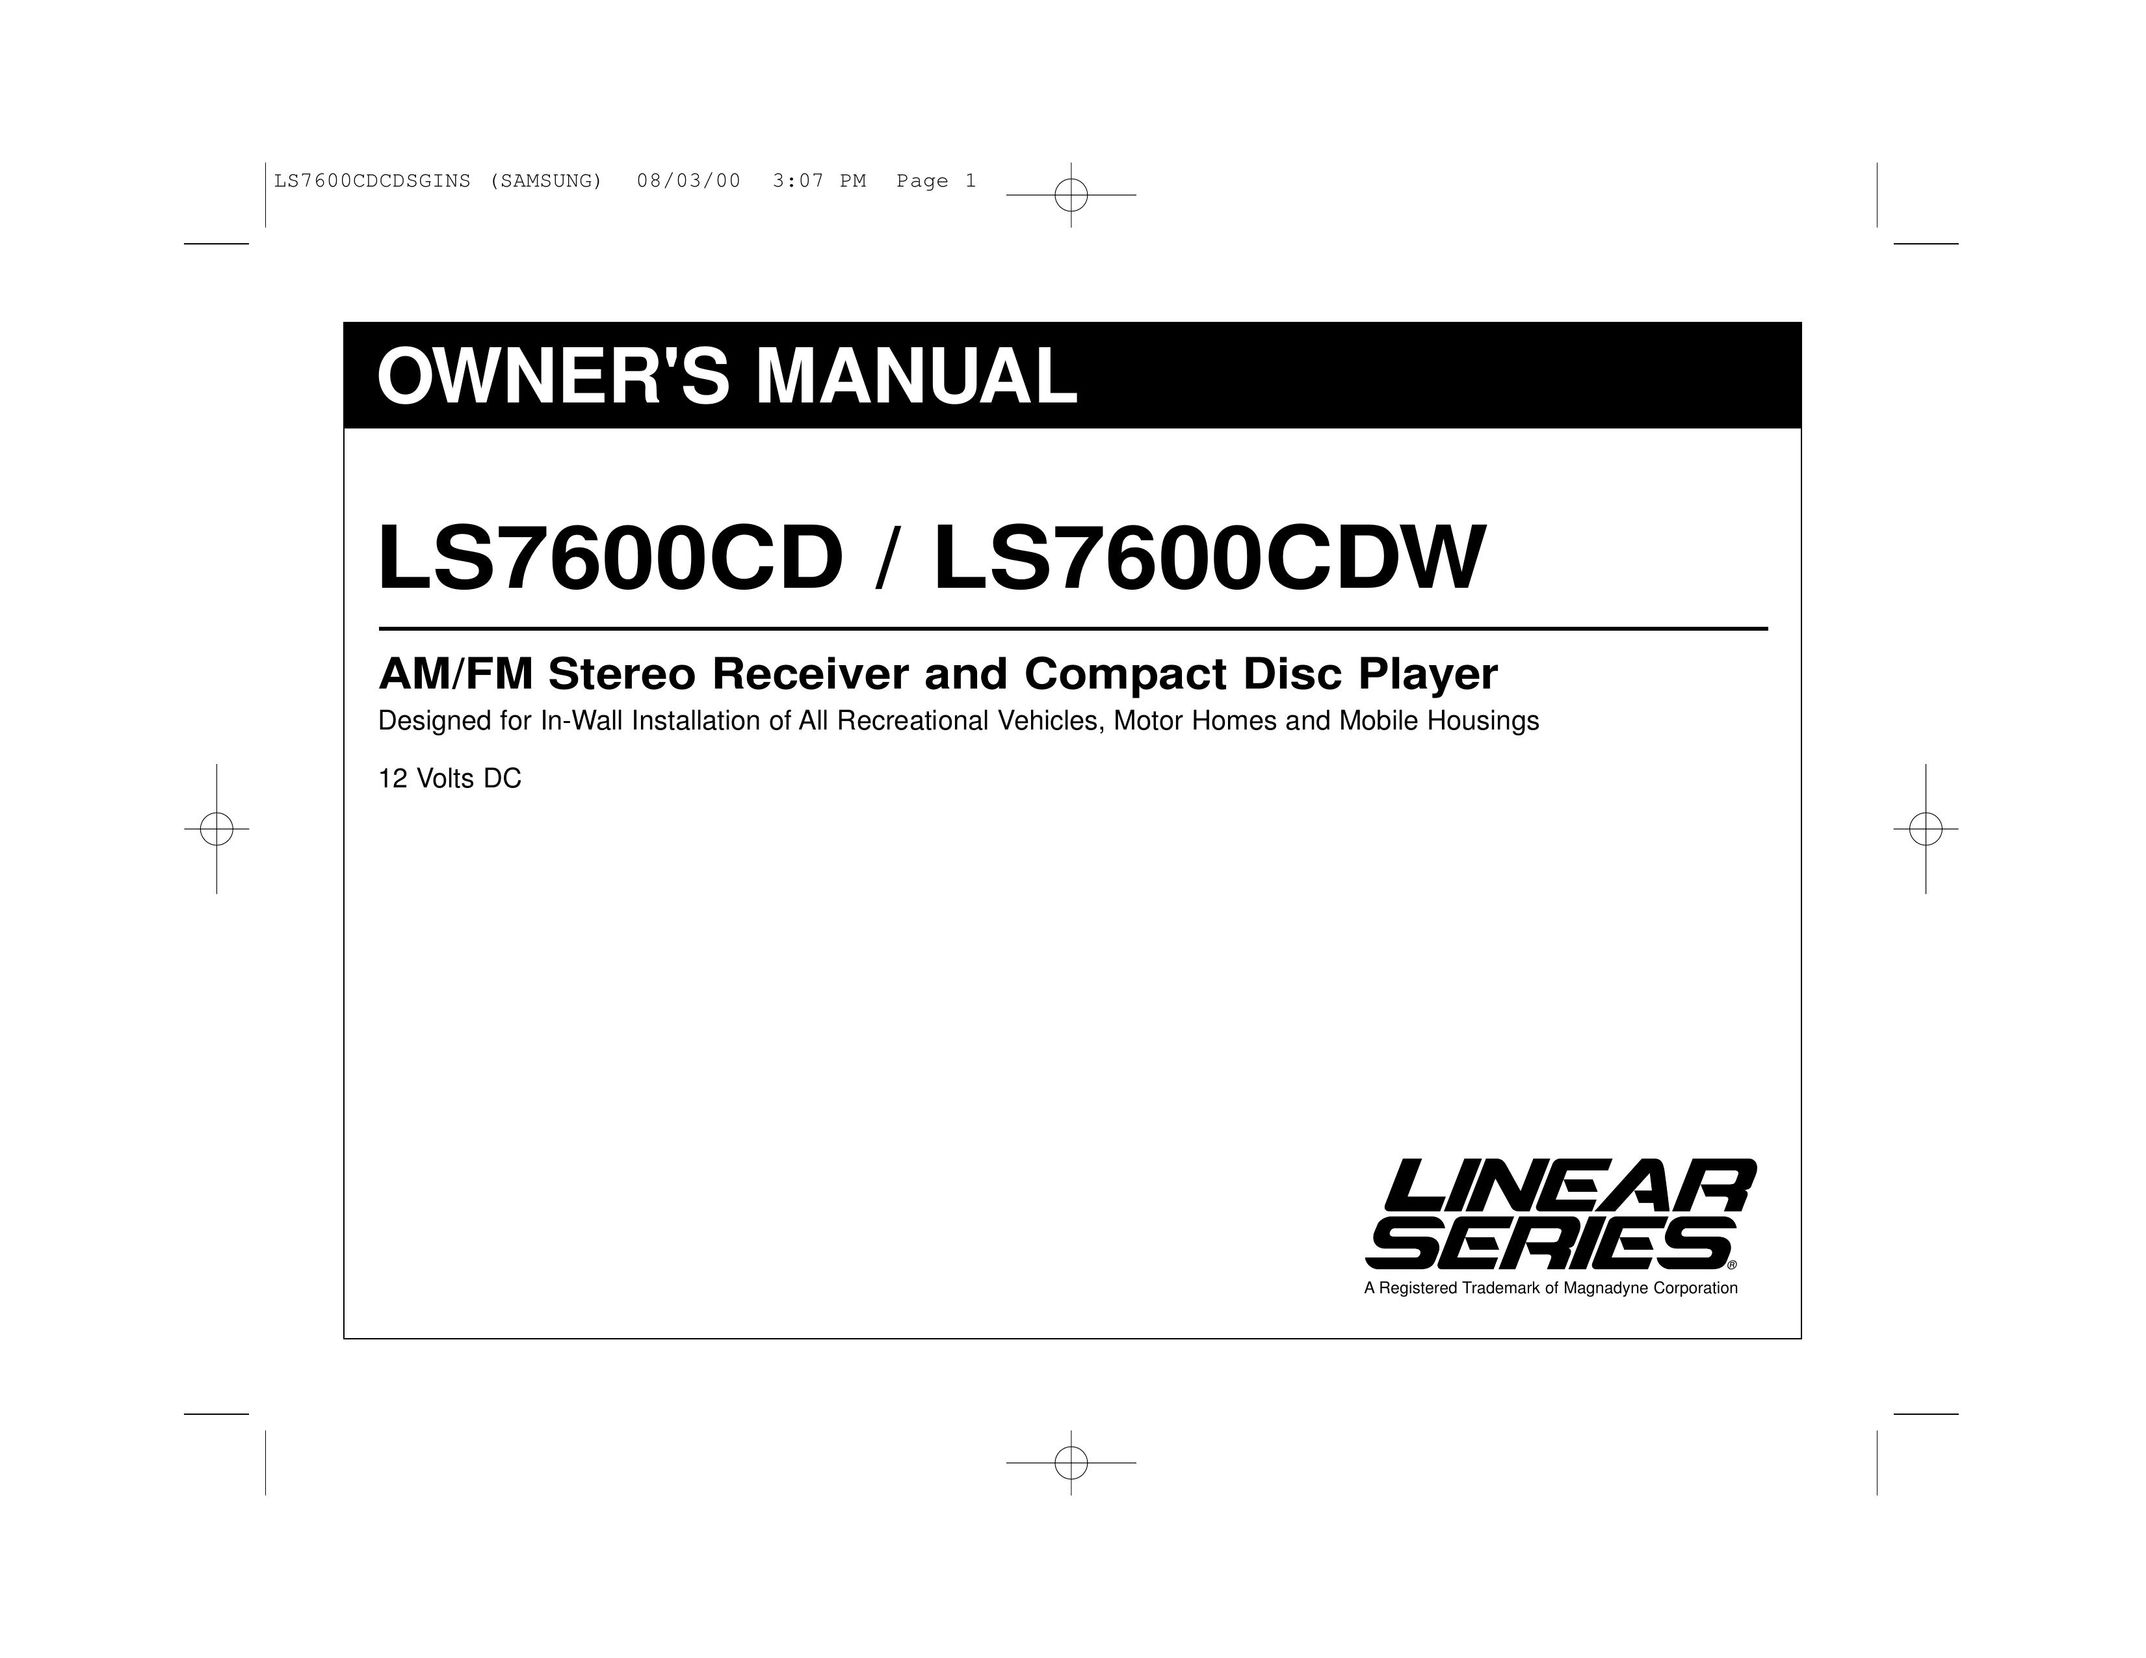 Carbine LS7600CDW Stereo Receiver User Manual